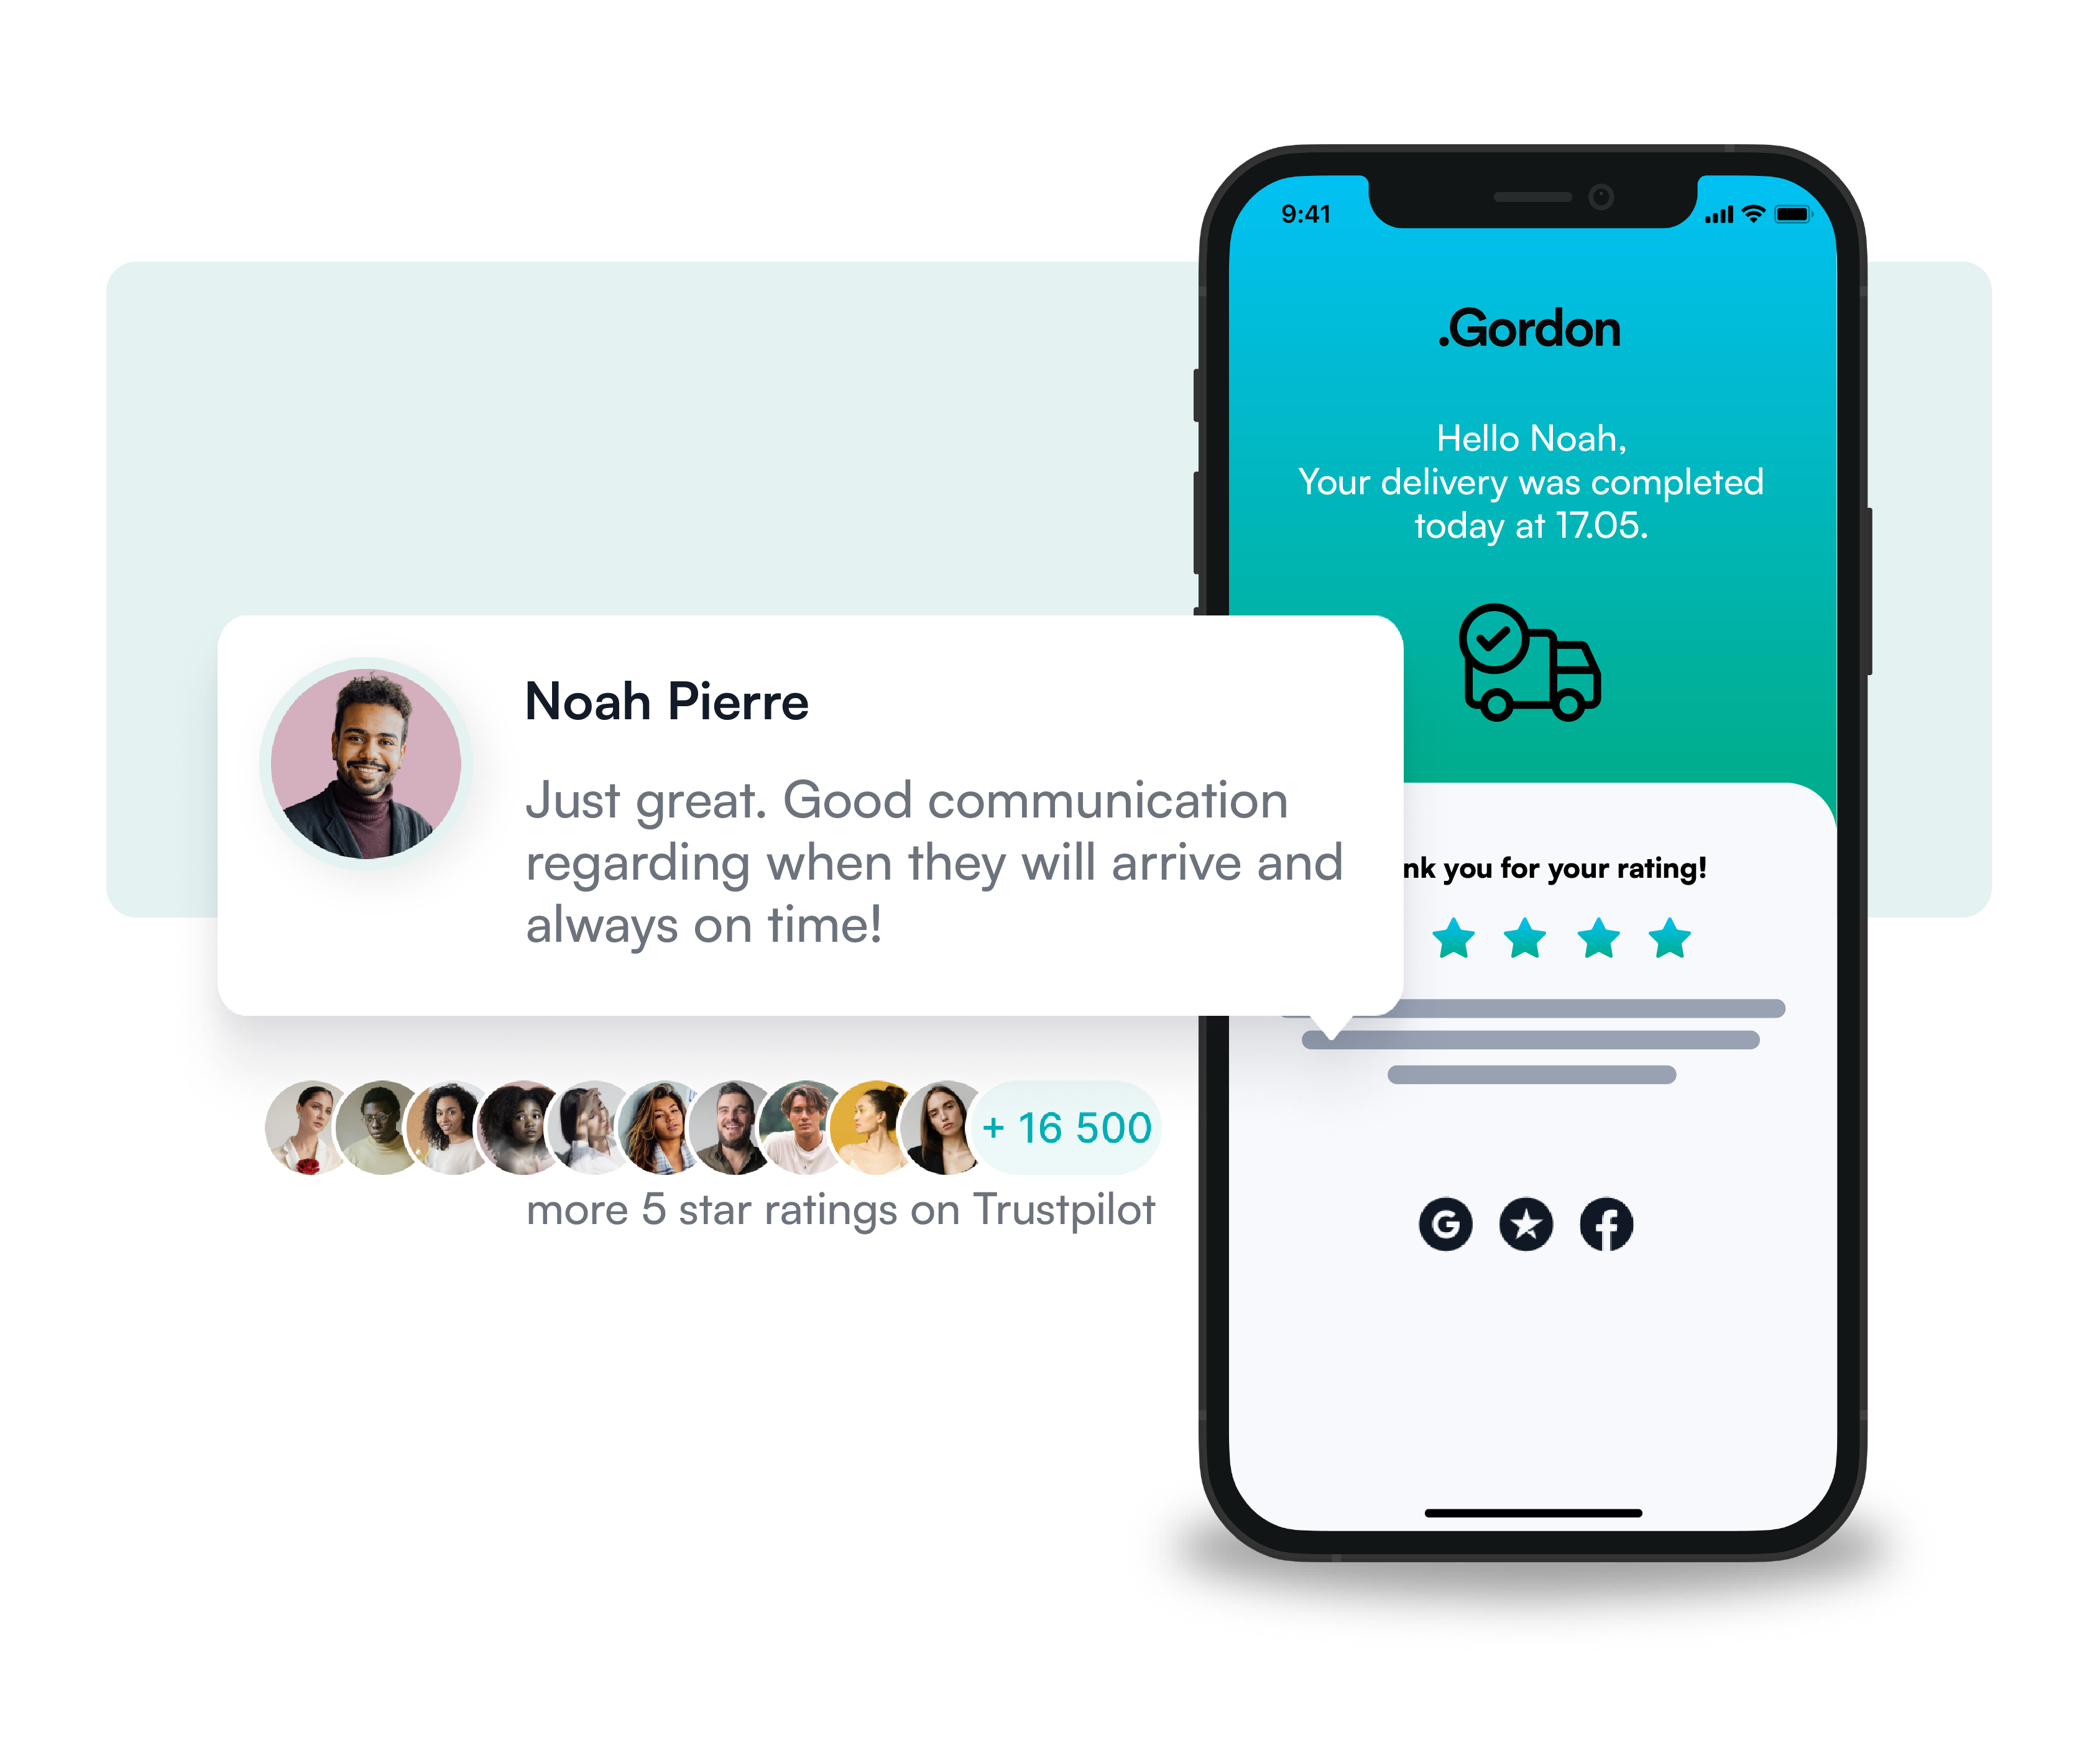 Once a delivery has been made you can easily collect feedback to improve future deliveries. They can rate both their overall experience and enter additional comments.